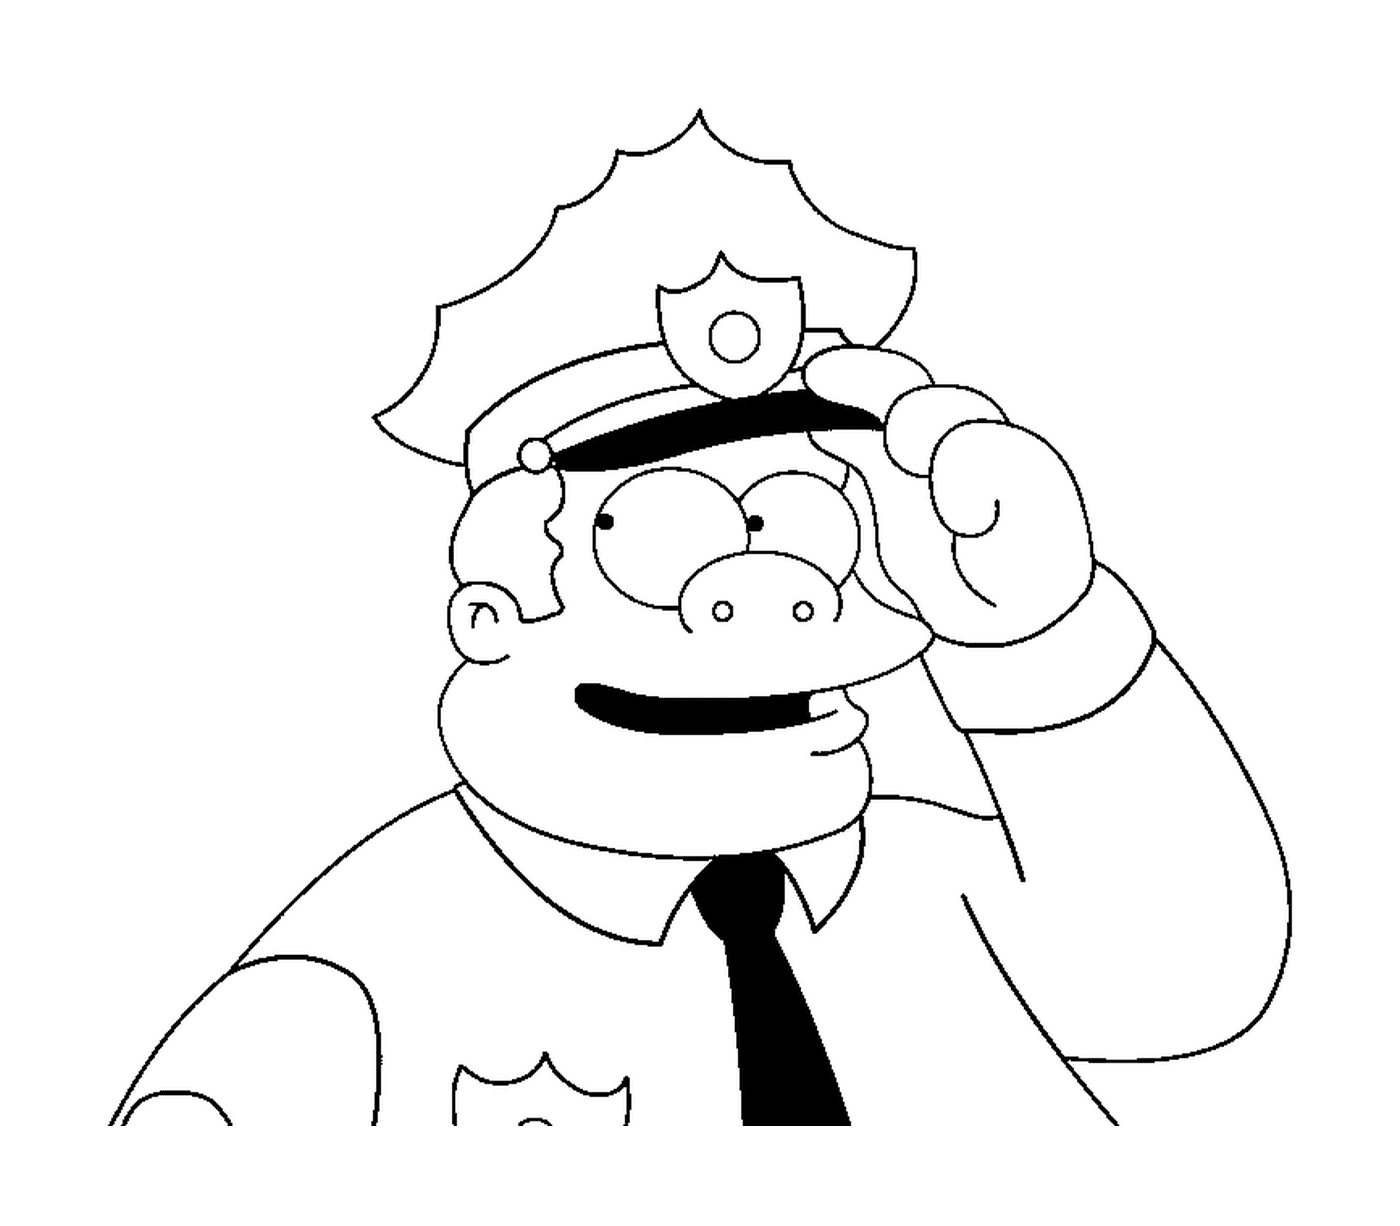  Chief of Police Simpson 